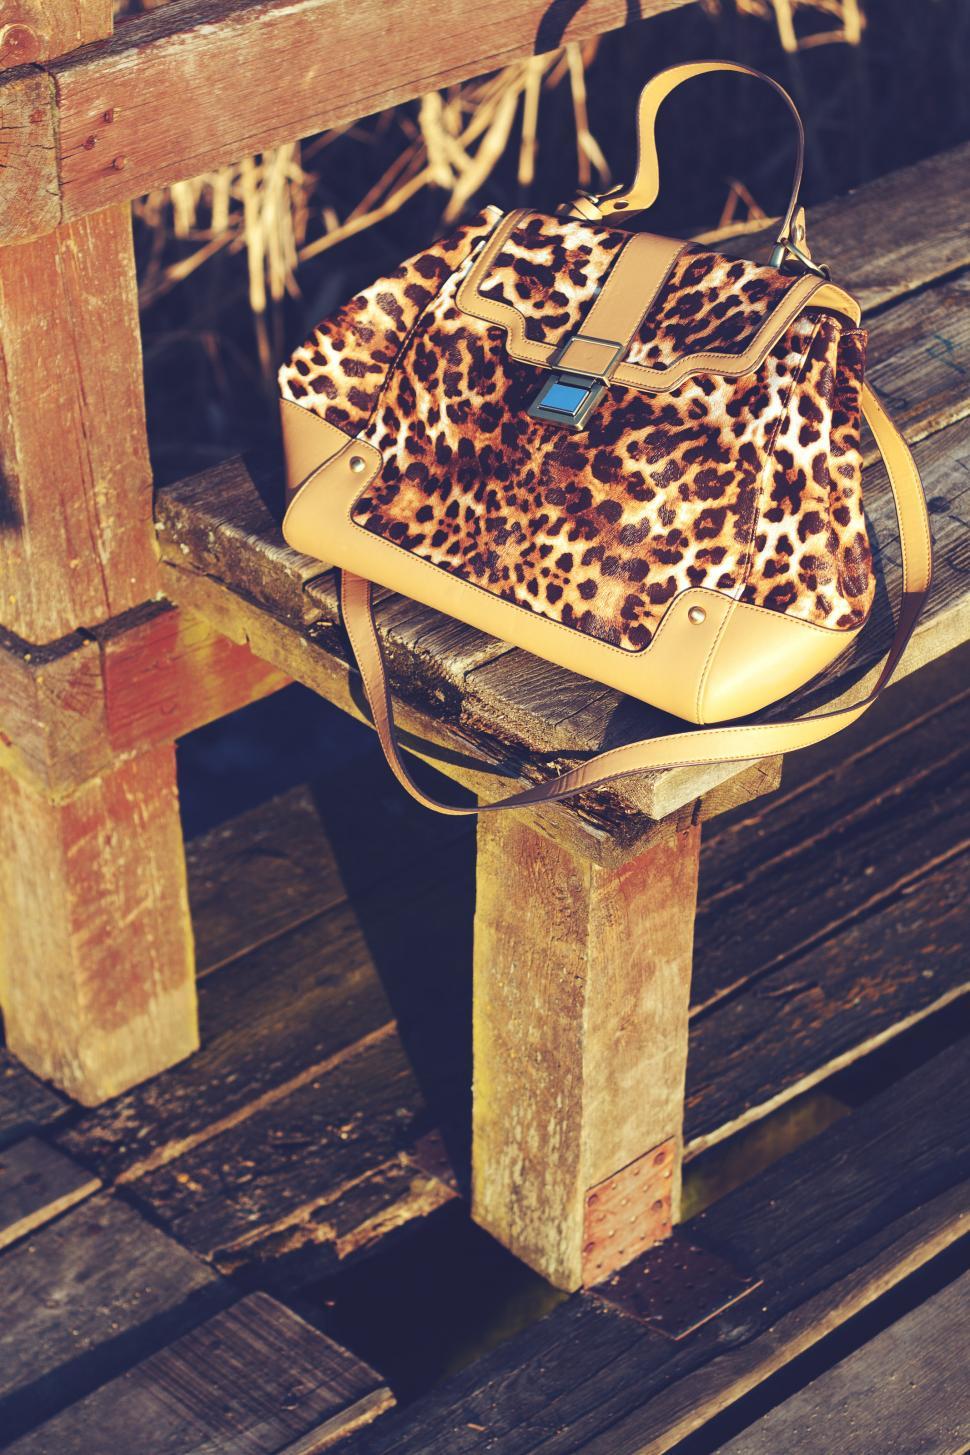 Free Image of Leopard Print Purse on Wooden Bench 